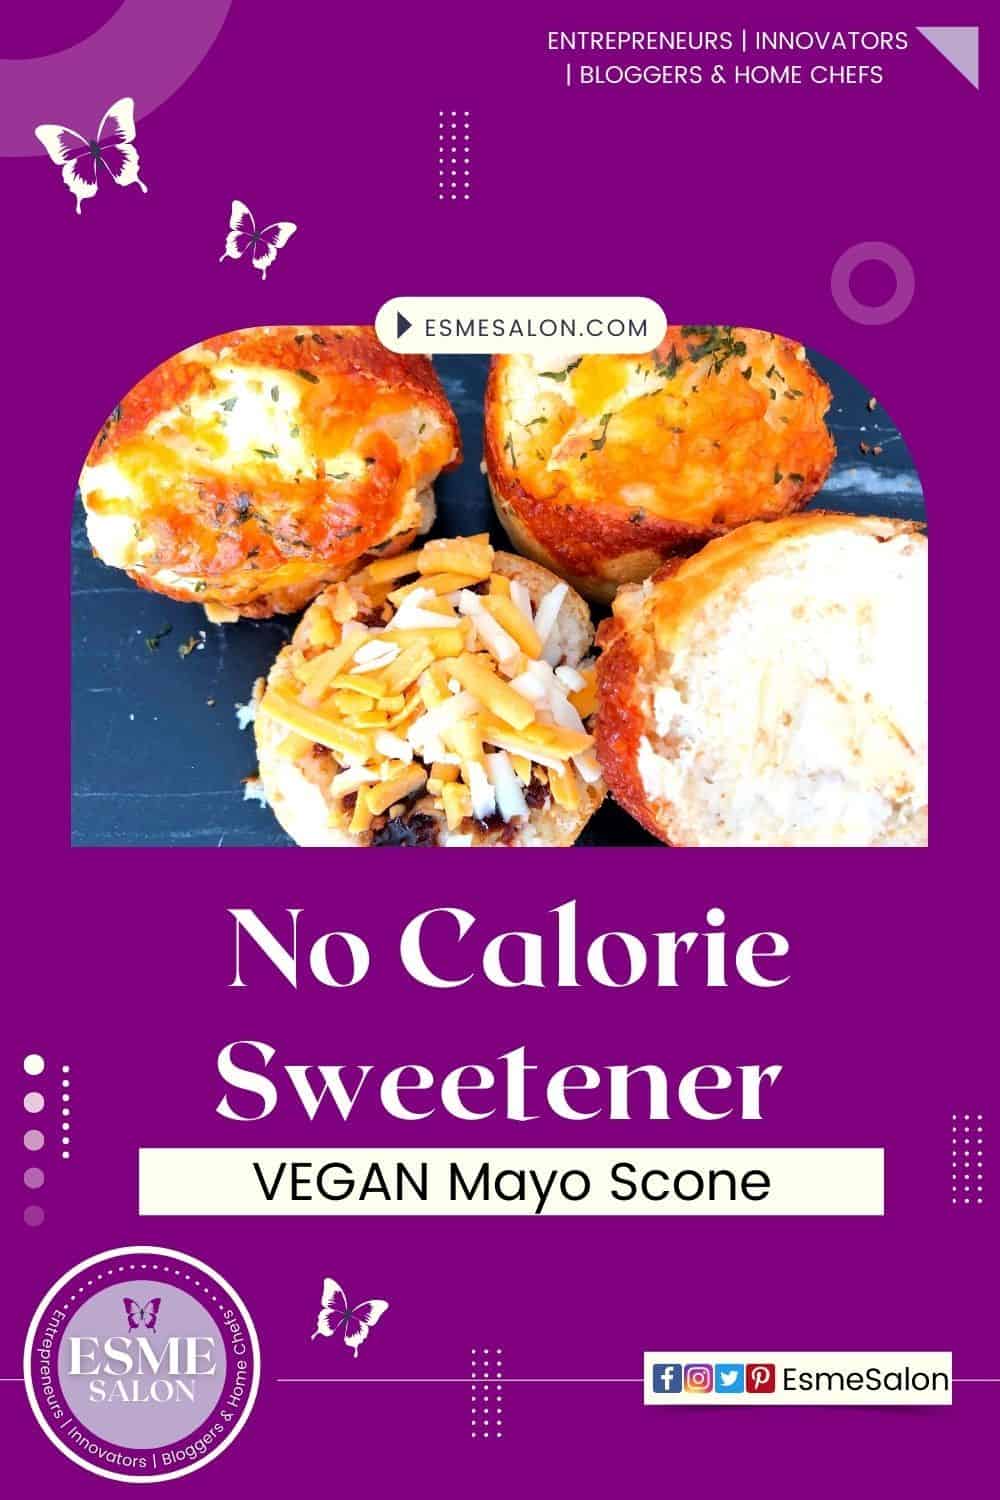 Vegan Mayo Splenda No Calorie Sweetener Scones topped with grated cheese and spread